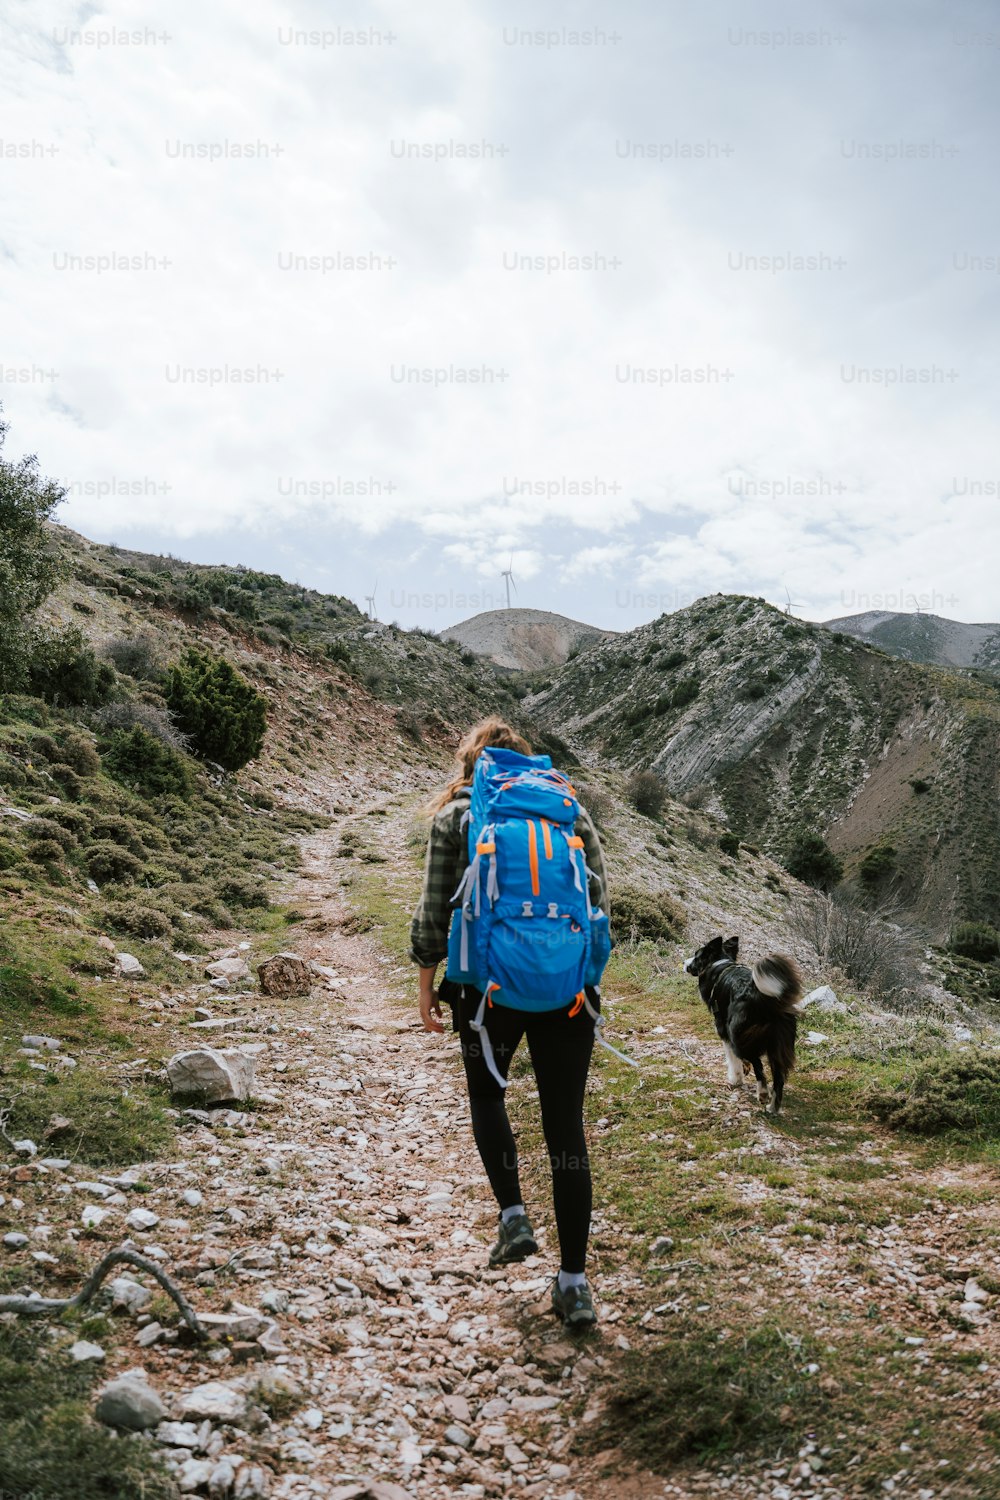 a person with a backpack and a dog on a trail